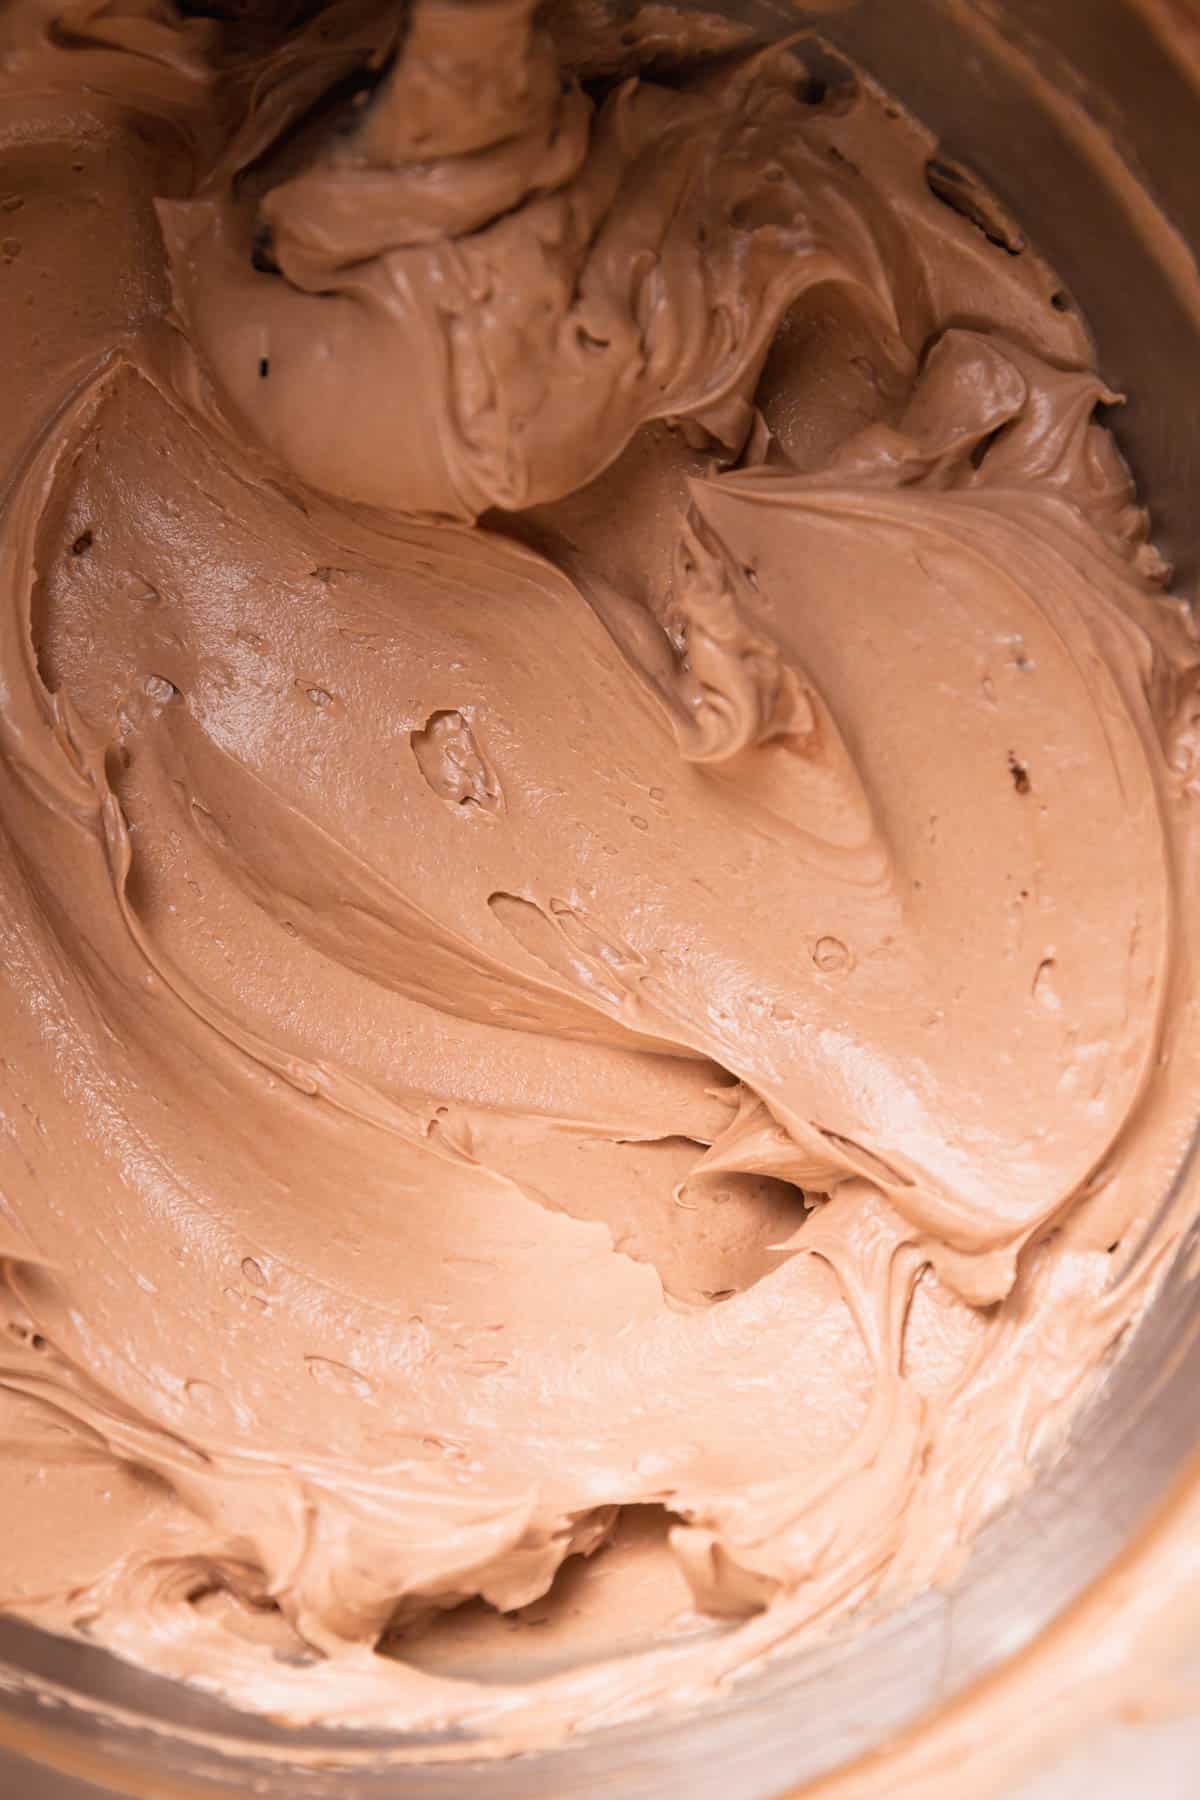 chocolate coffee buttercream in a mixing bowl.